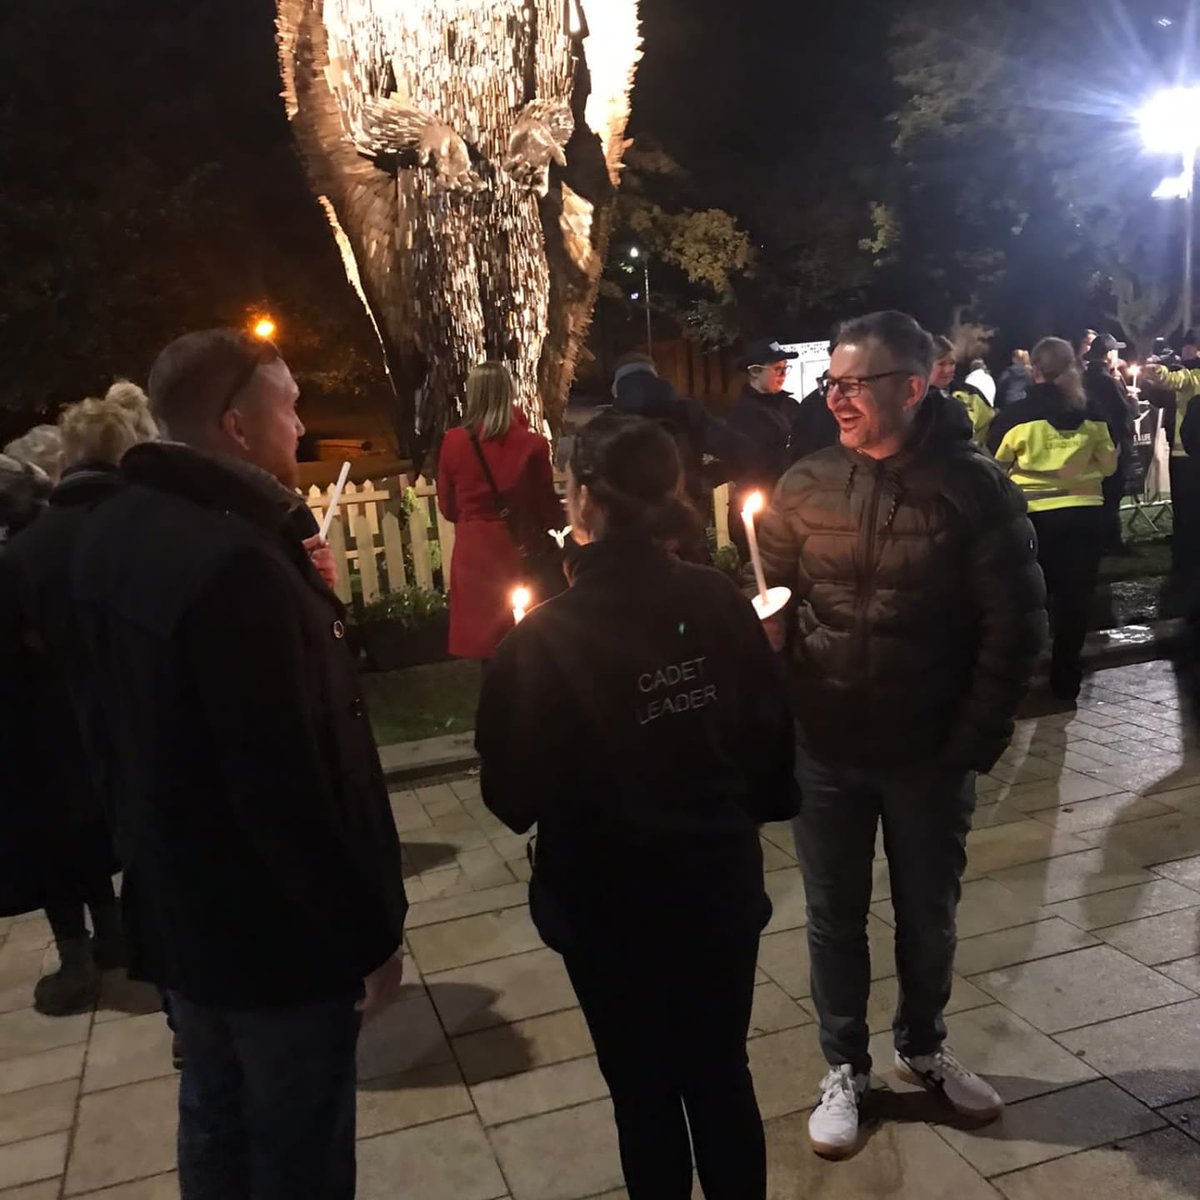 It's been awe inspiring to also meet @AlfieBradley1 at the vigil, the visionary creator behind #KnifeAngel and everything it stands for. A huge well done to the organisers & everyone involved in making tonight truly memorable & spreading the message. #KnifeAngelLancashire